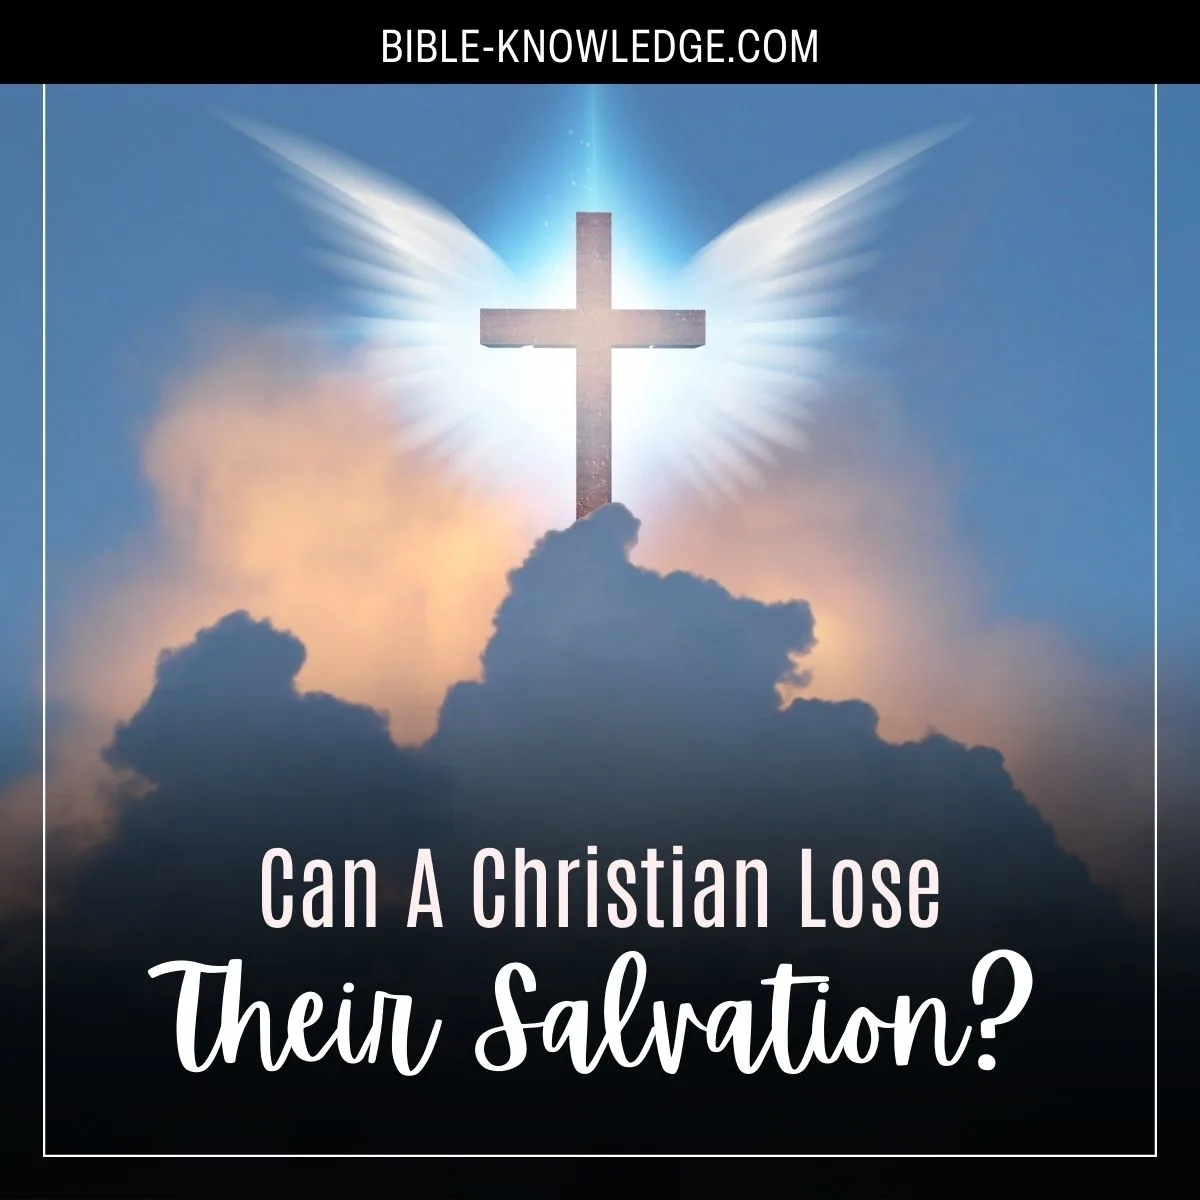 Can A Christian Lose Their Salvation?